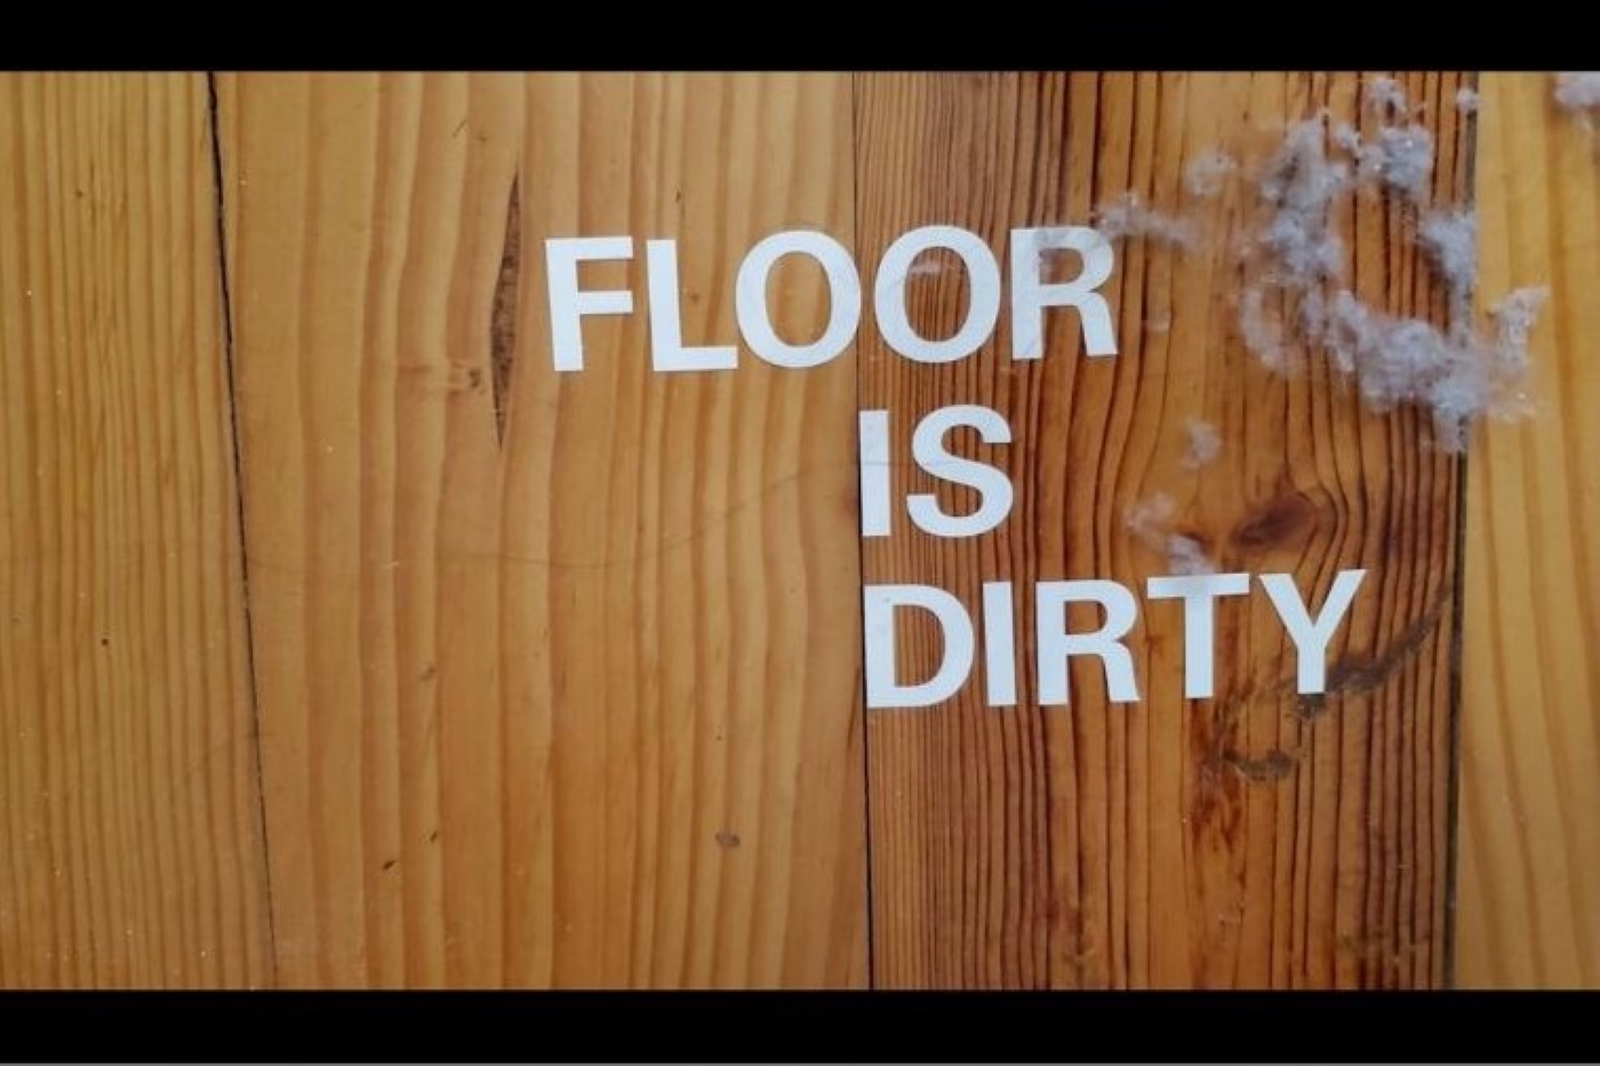 A wood floor with a dust bunny on it. White letters on the floor read "Floor is dirty."